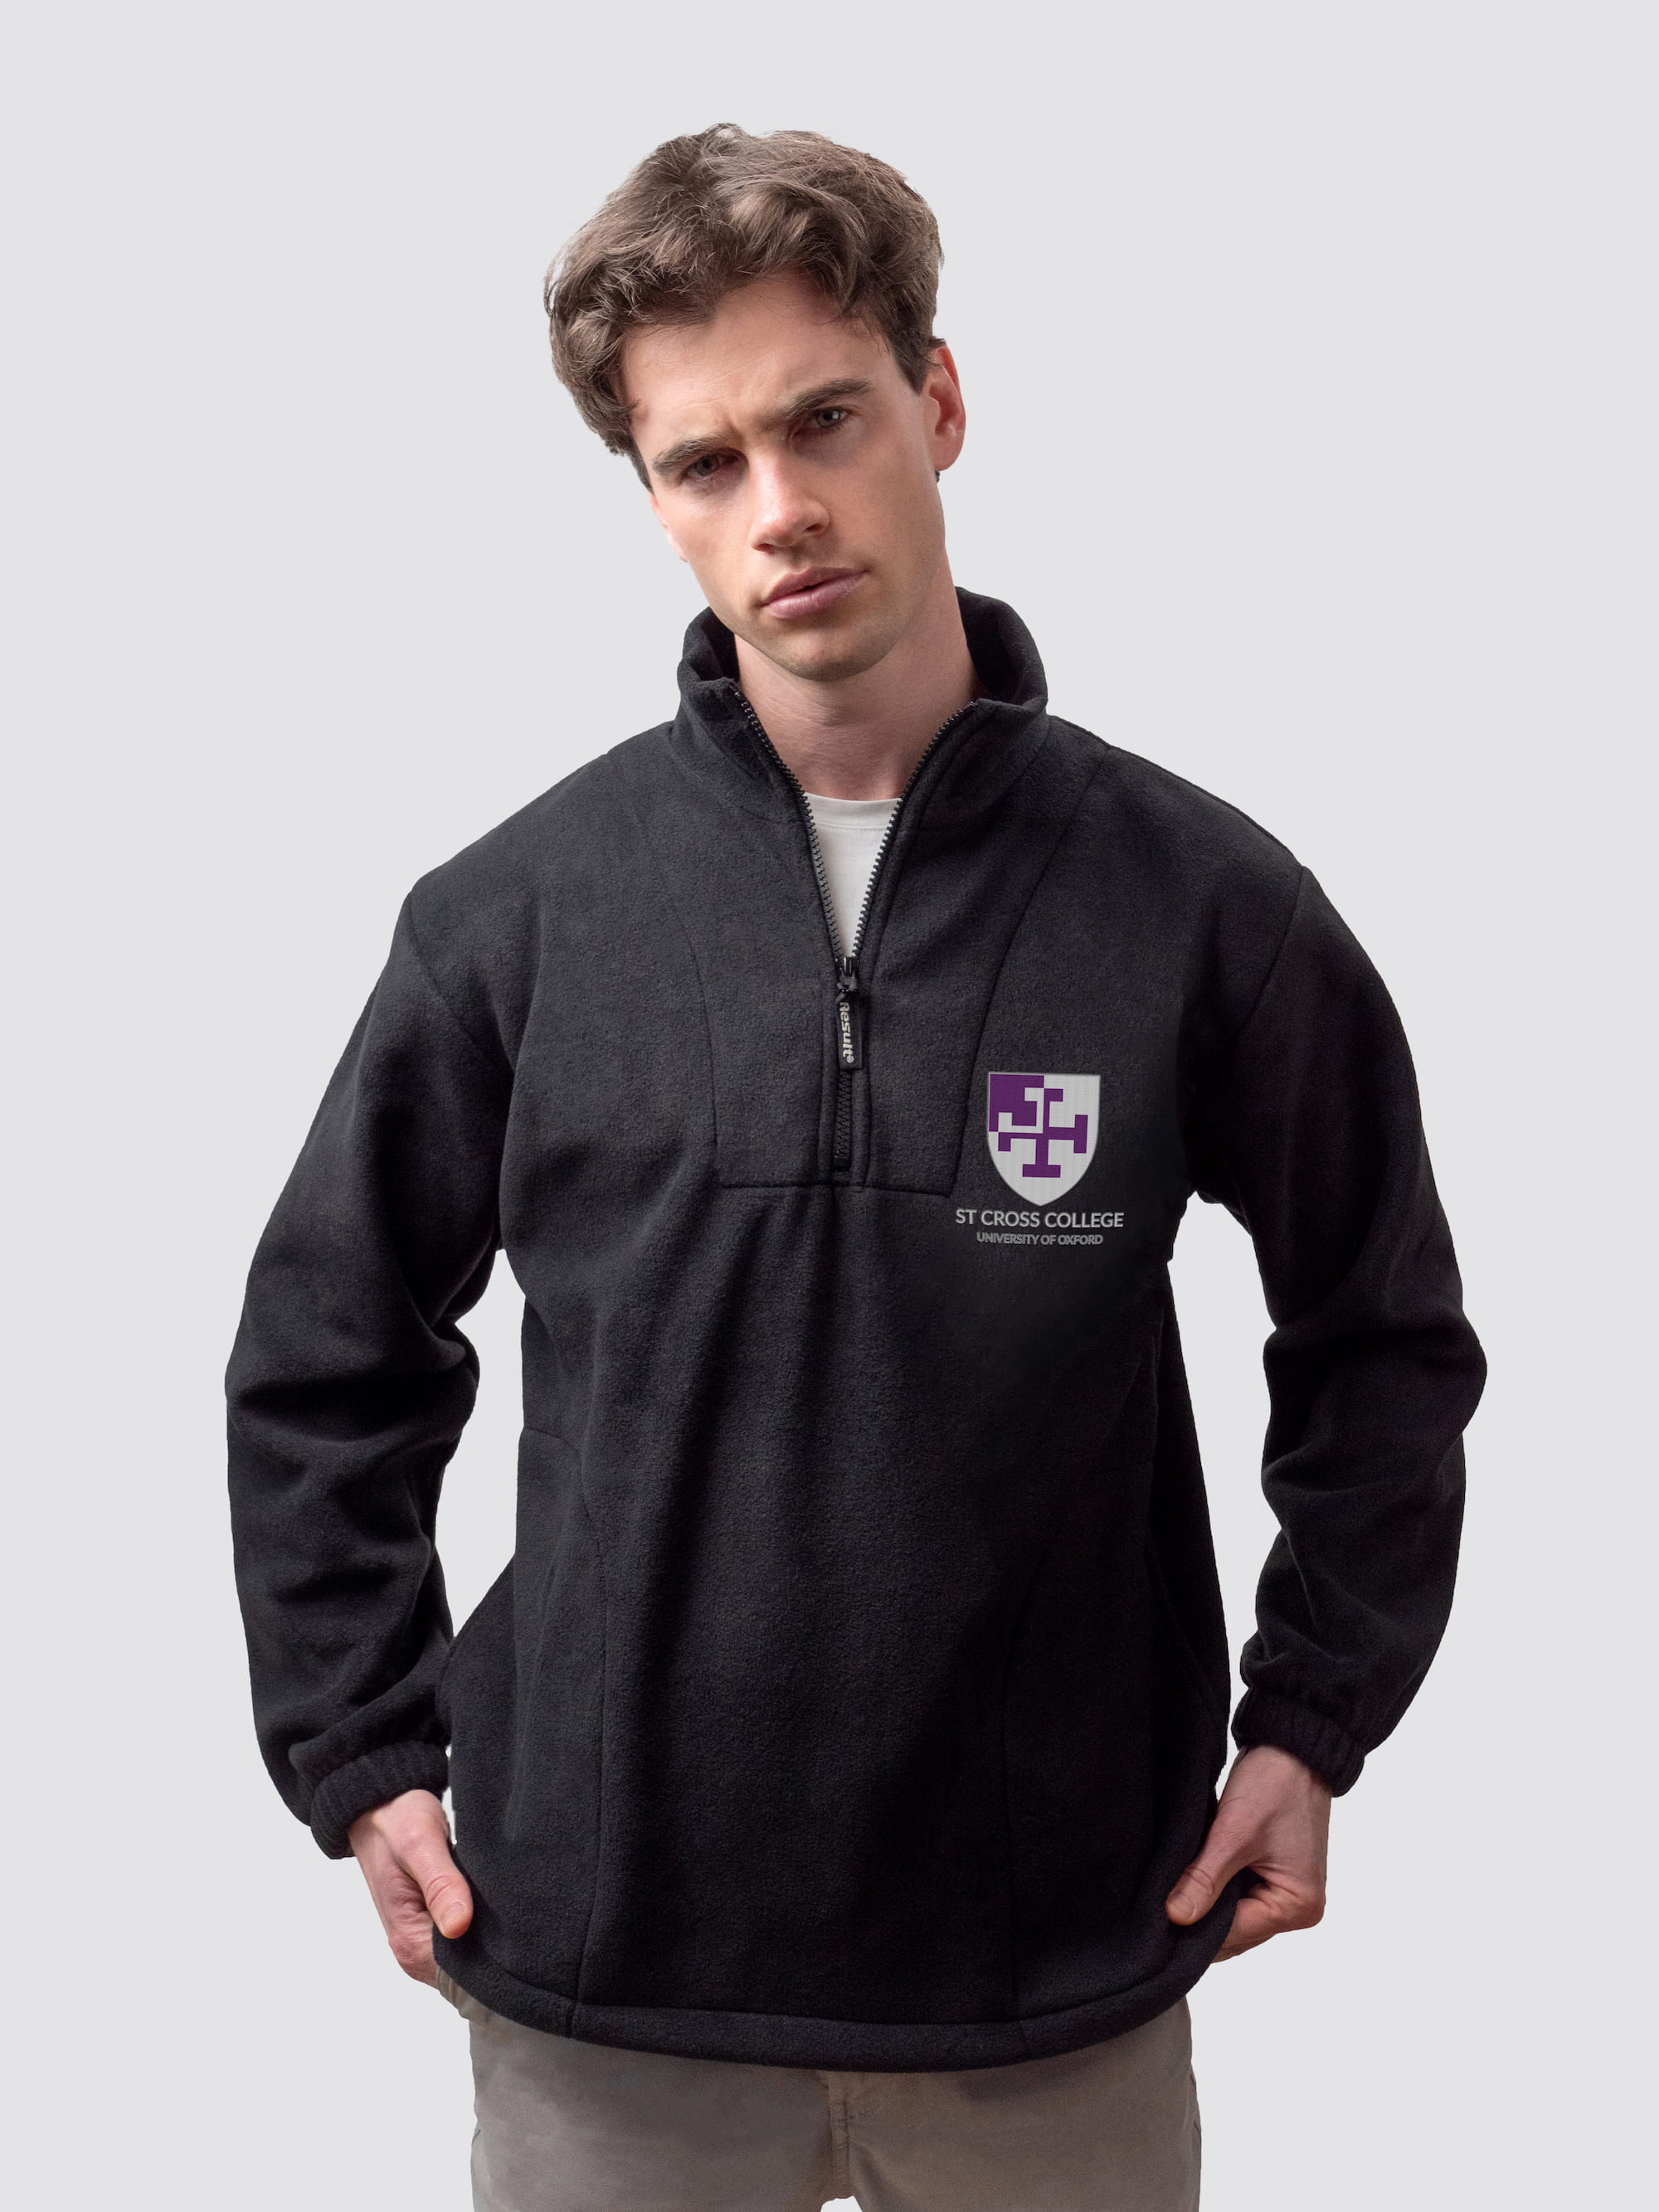 Oxford university fleece, with custom embroidered initials and St Cross crest